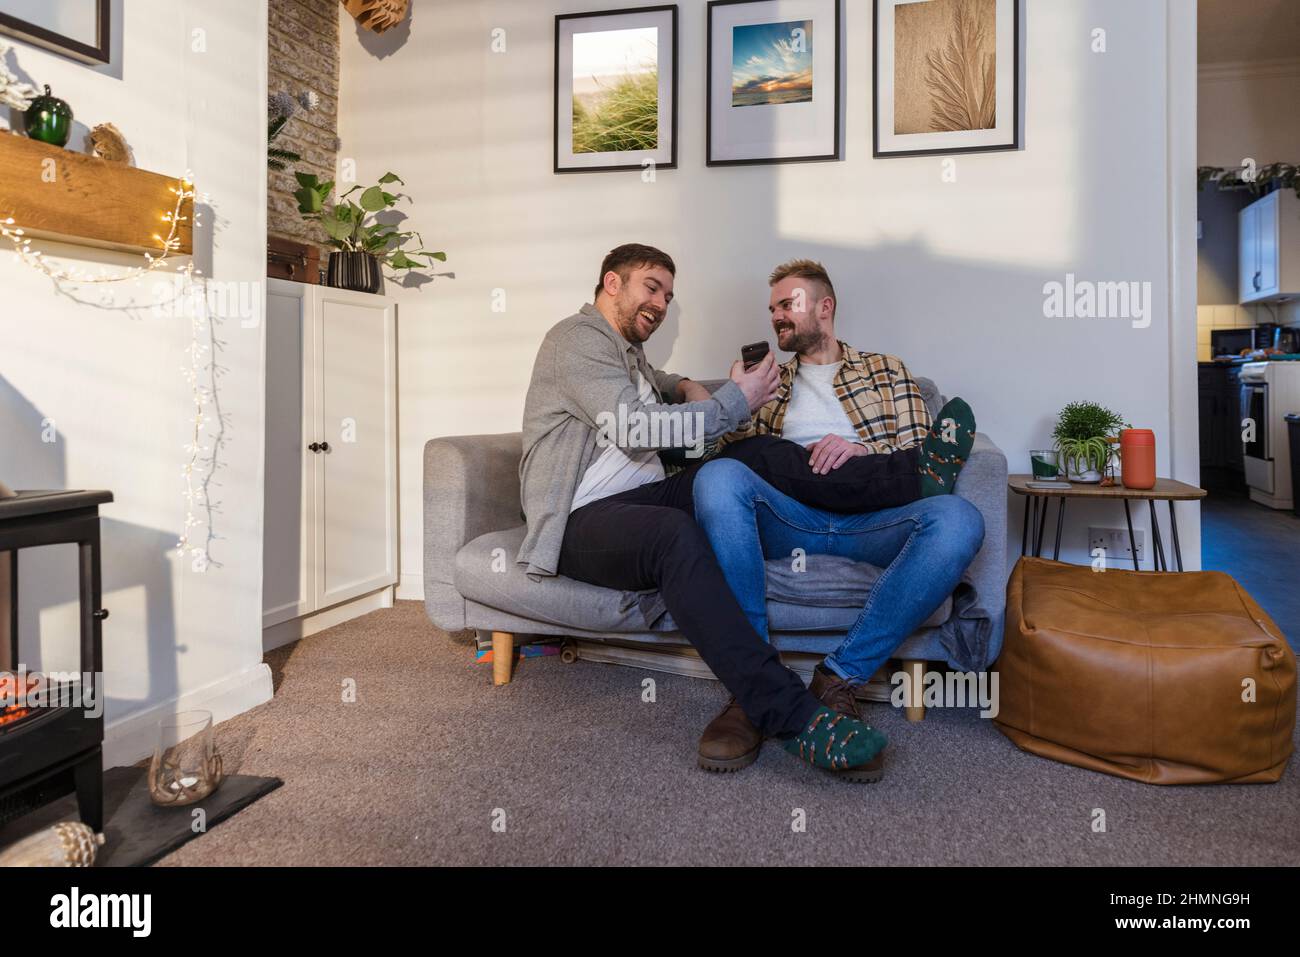 A front-view shot of an LGBTQI same sex male couple sitting in their living room relaxing, one man is showing his partner his smart phone. Stock Photo